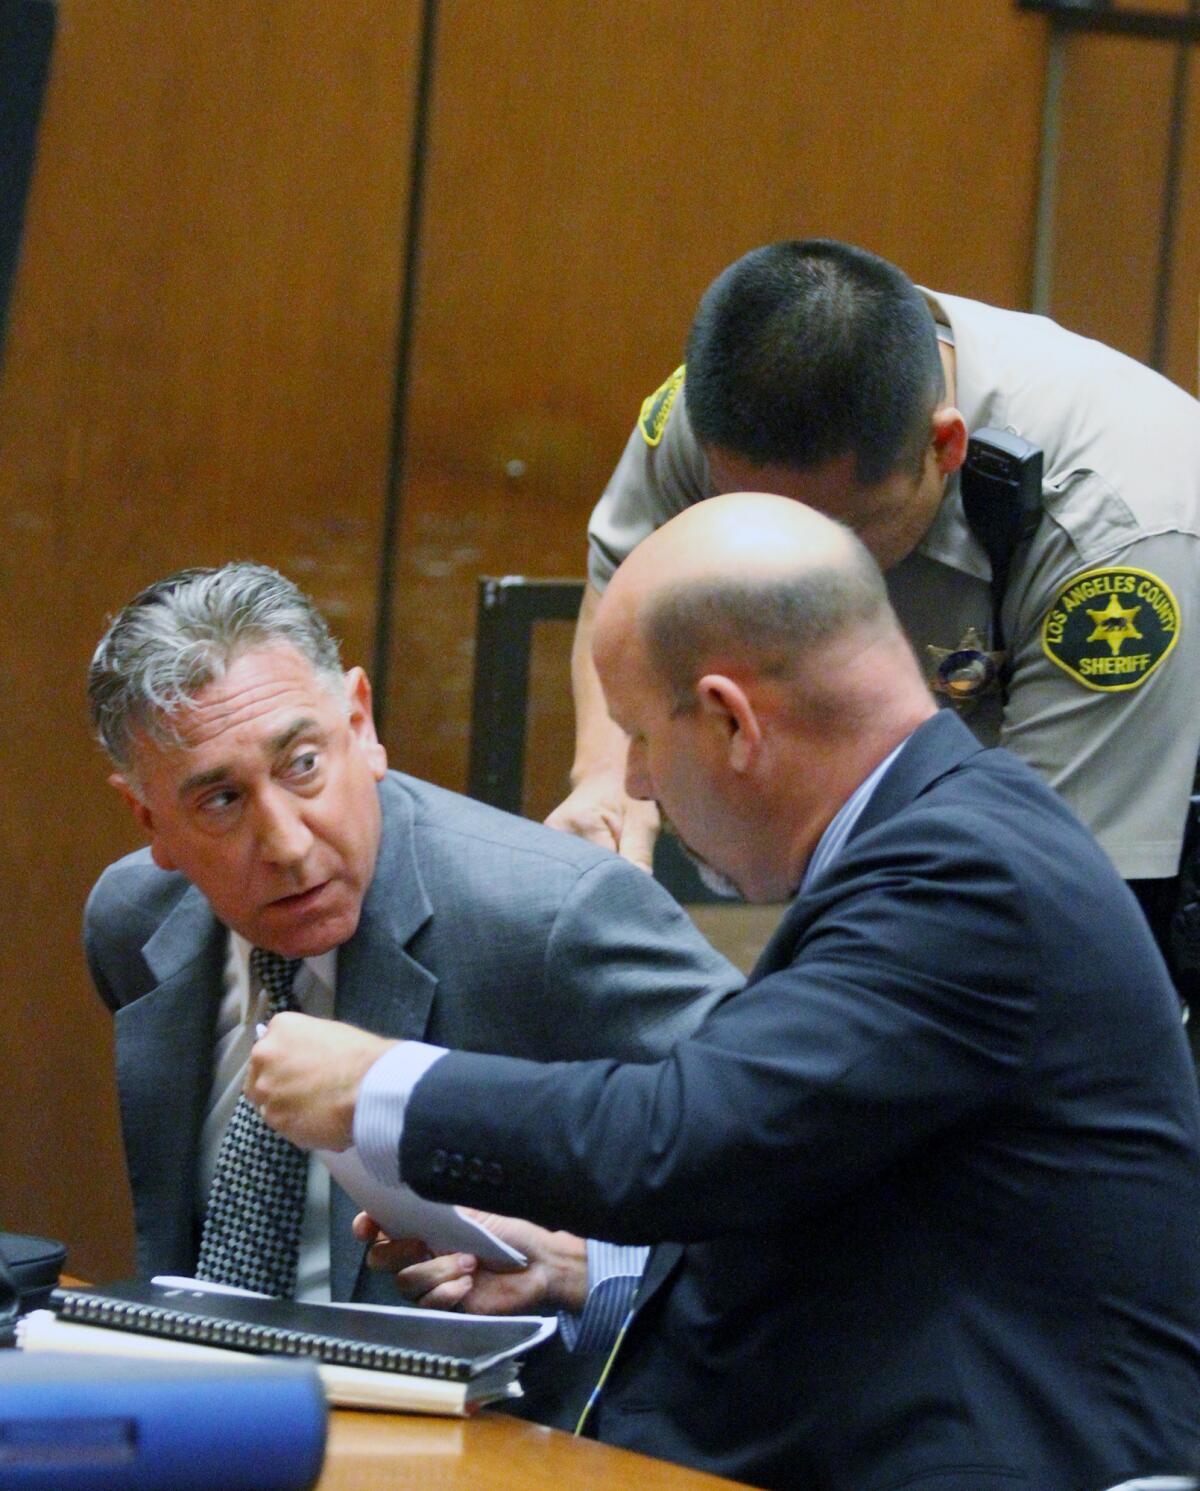 Former Glendale Mayor John Drayman, after he was sentenced to one year in Los Angeles County jail, is put in handcuffs by a Los Angeles County Sheriff's deputy with his lawyer Sean McDonald at his side at Superior Court in Los Angeles on Monday, April 7, 2014. Drayman was sentenced for embezzling proceeds from the Montrose Farmer's Market, and filing false tax returns. His sentence is 365 days in county jail, with 4 days credit for time served, and to pay restitution and all court fees.